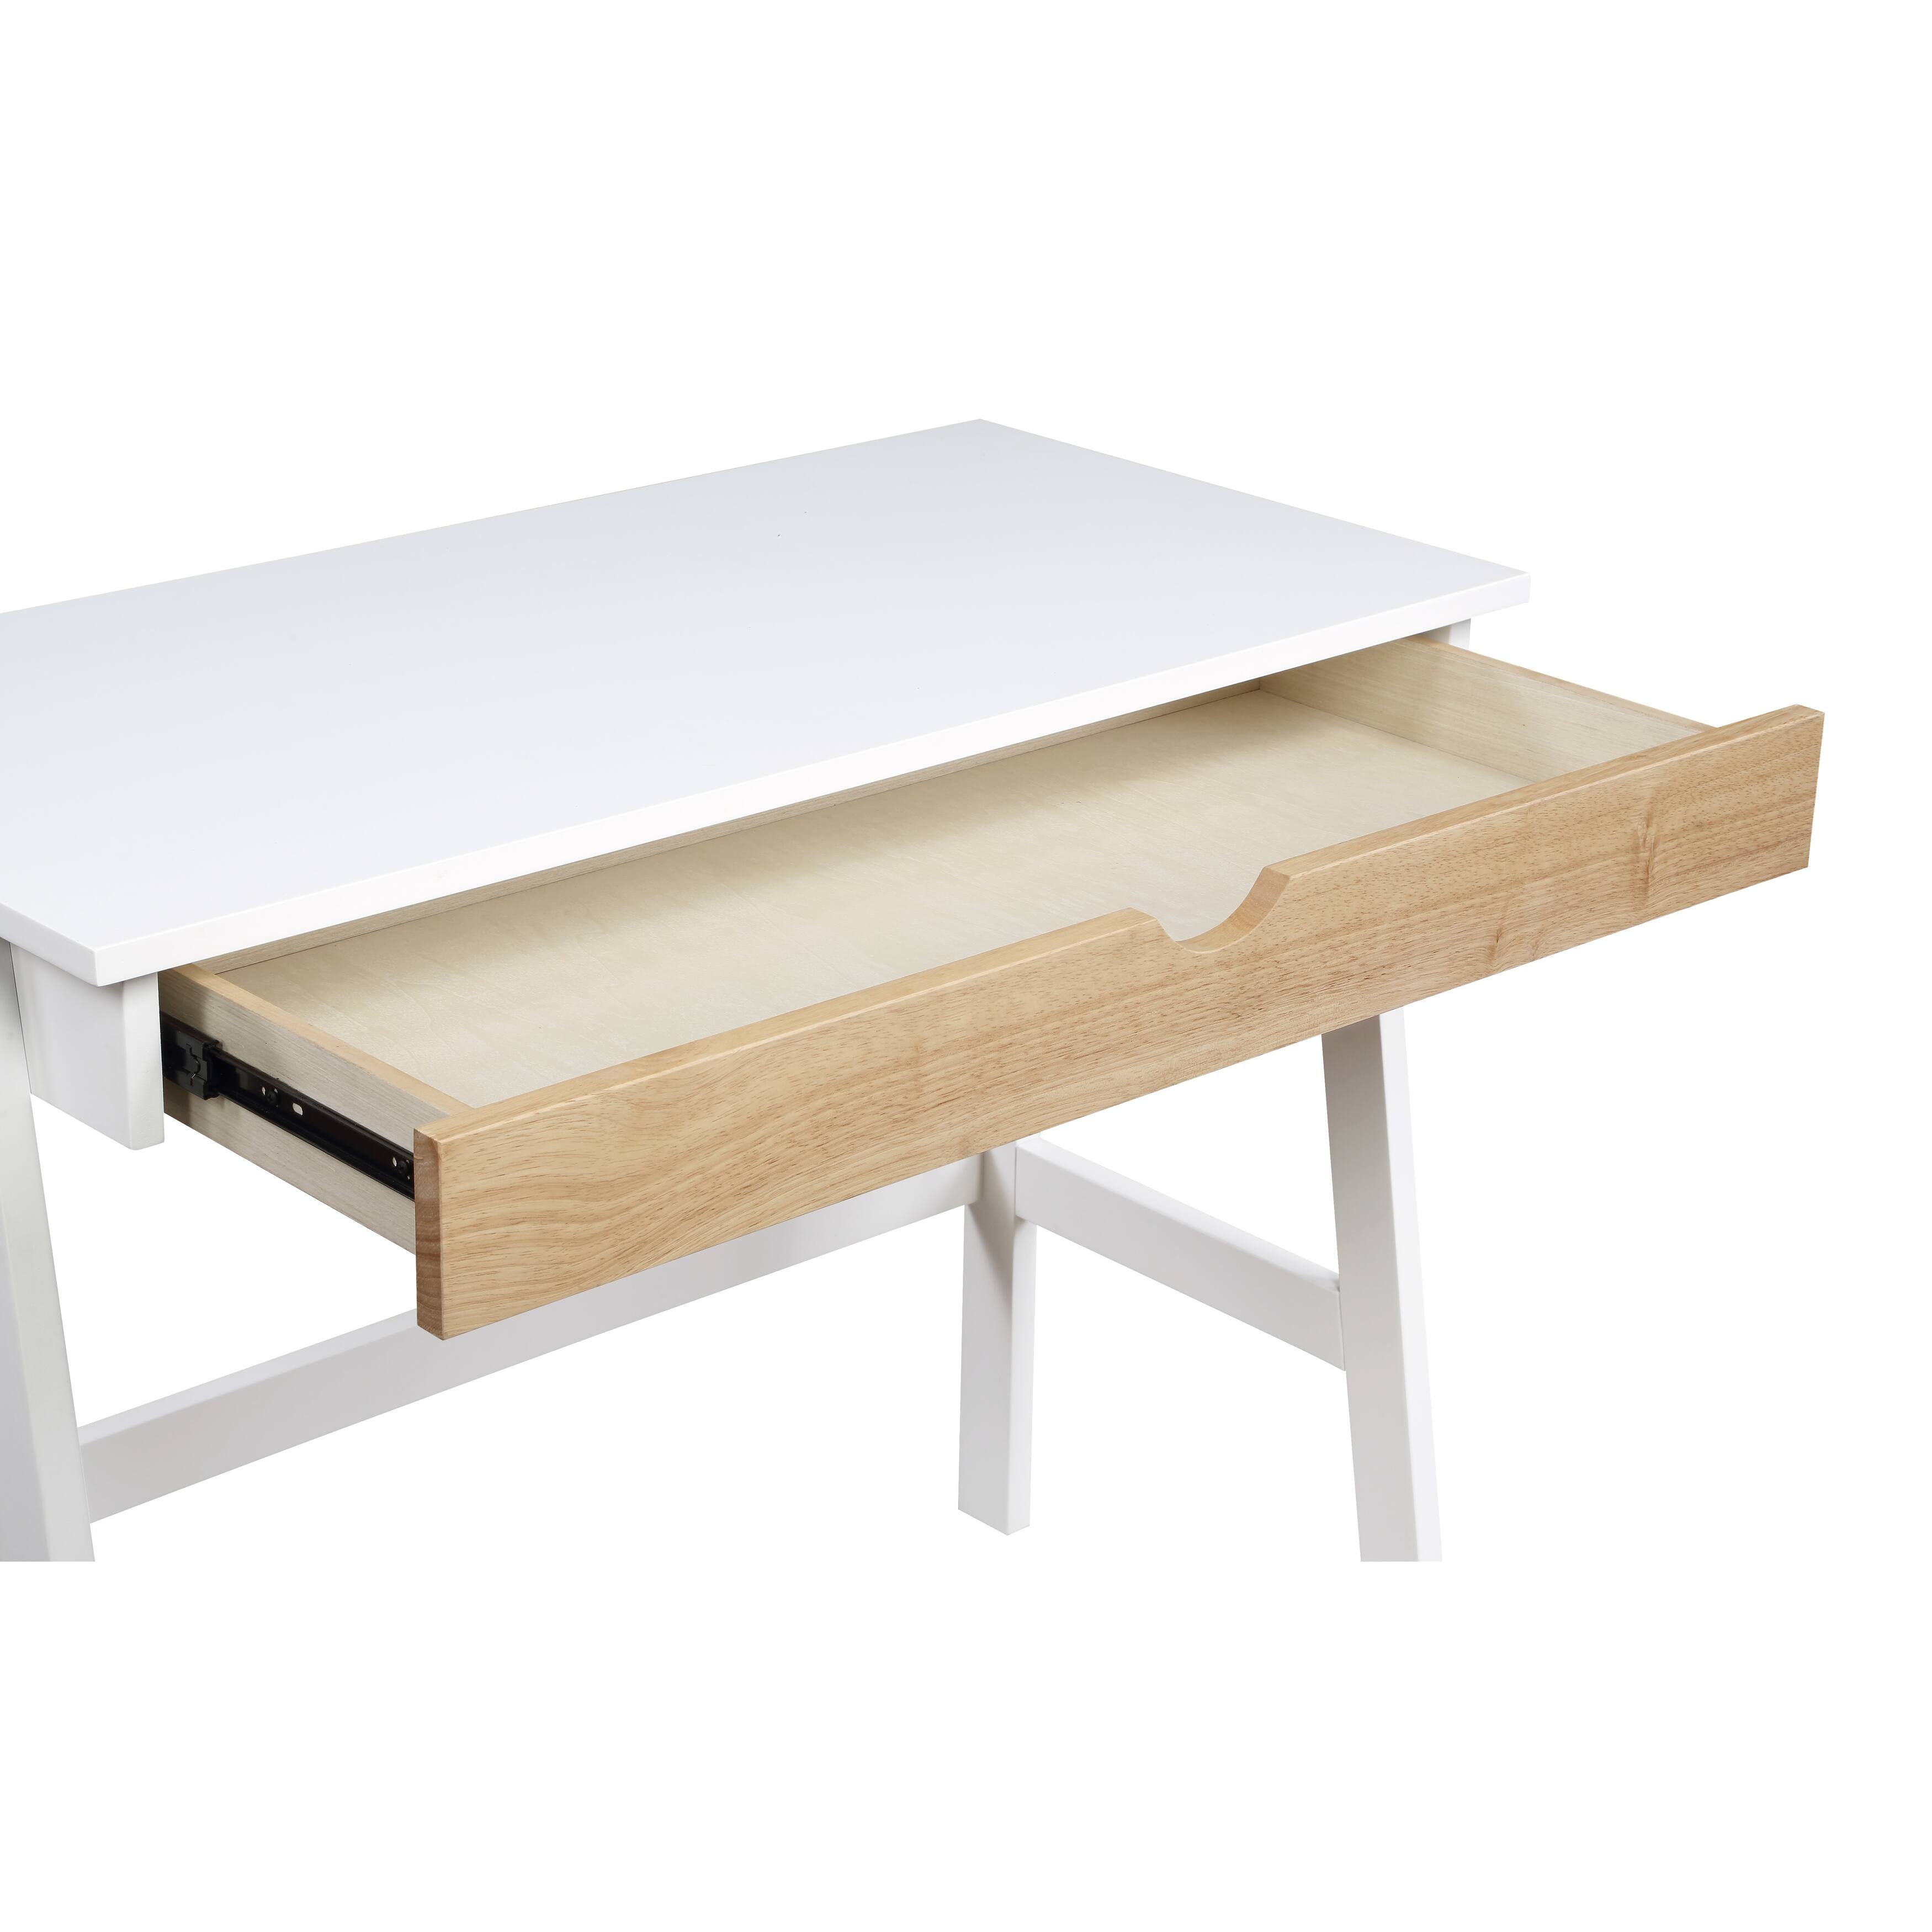 Solid Construction , Single Extension Metal Glides , Large Single Drawer for Storage